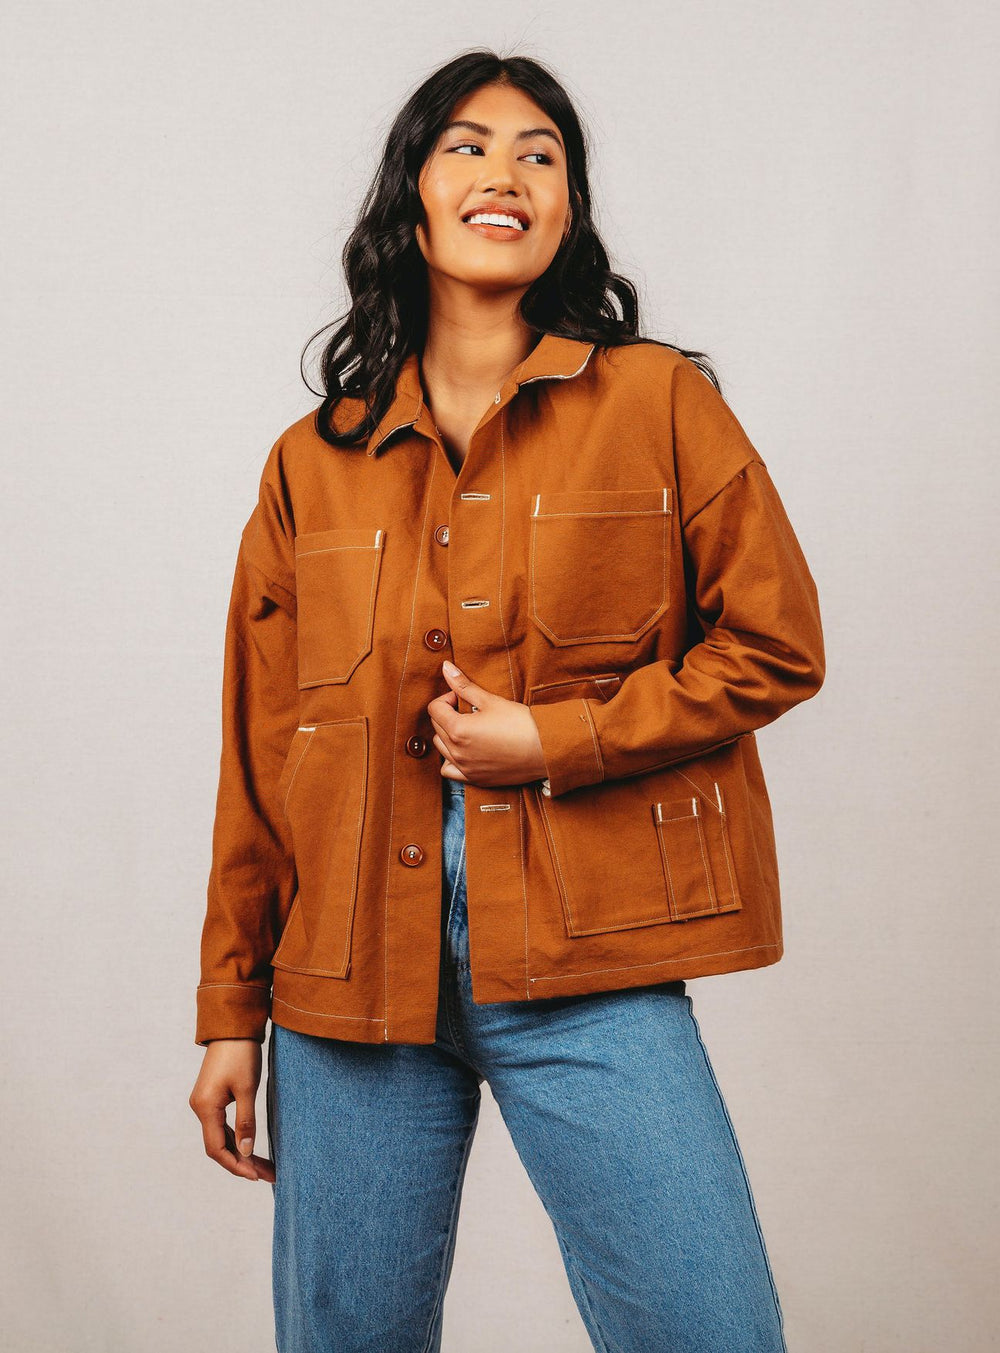 Woman wearing the Unisex Ilford Jacket sewing pattern from Friday Pattern Company on The Fold Line. A jacket pattern made in light to heavyweight woven fabrics, featuring drop shoulders, placket sleeve with cuff, patch pockets, button front closure and hi